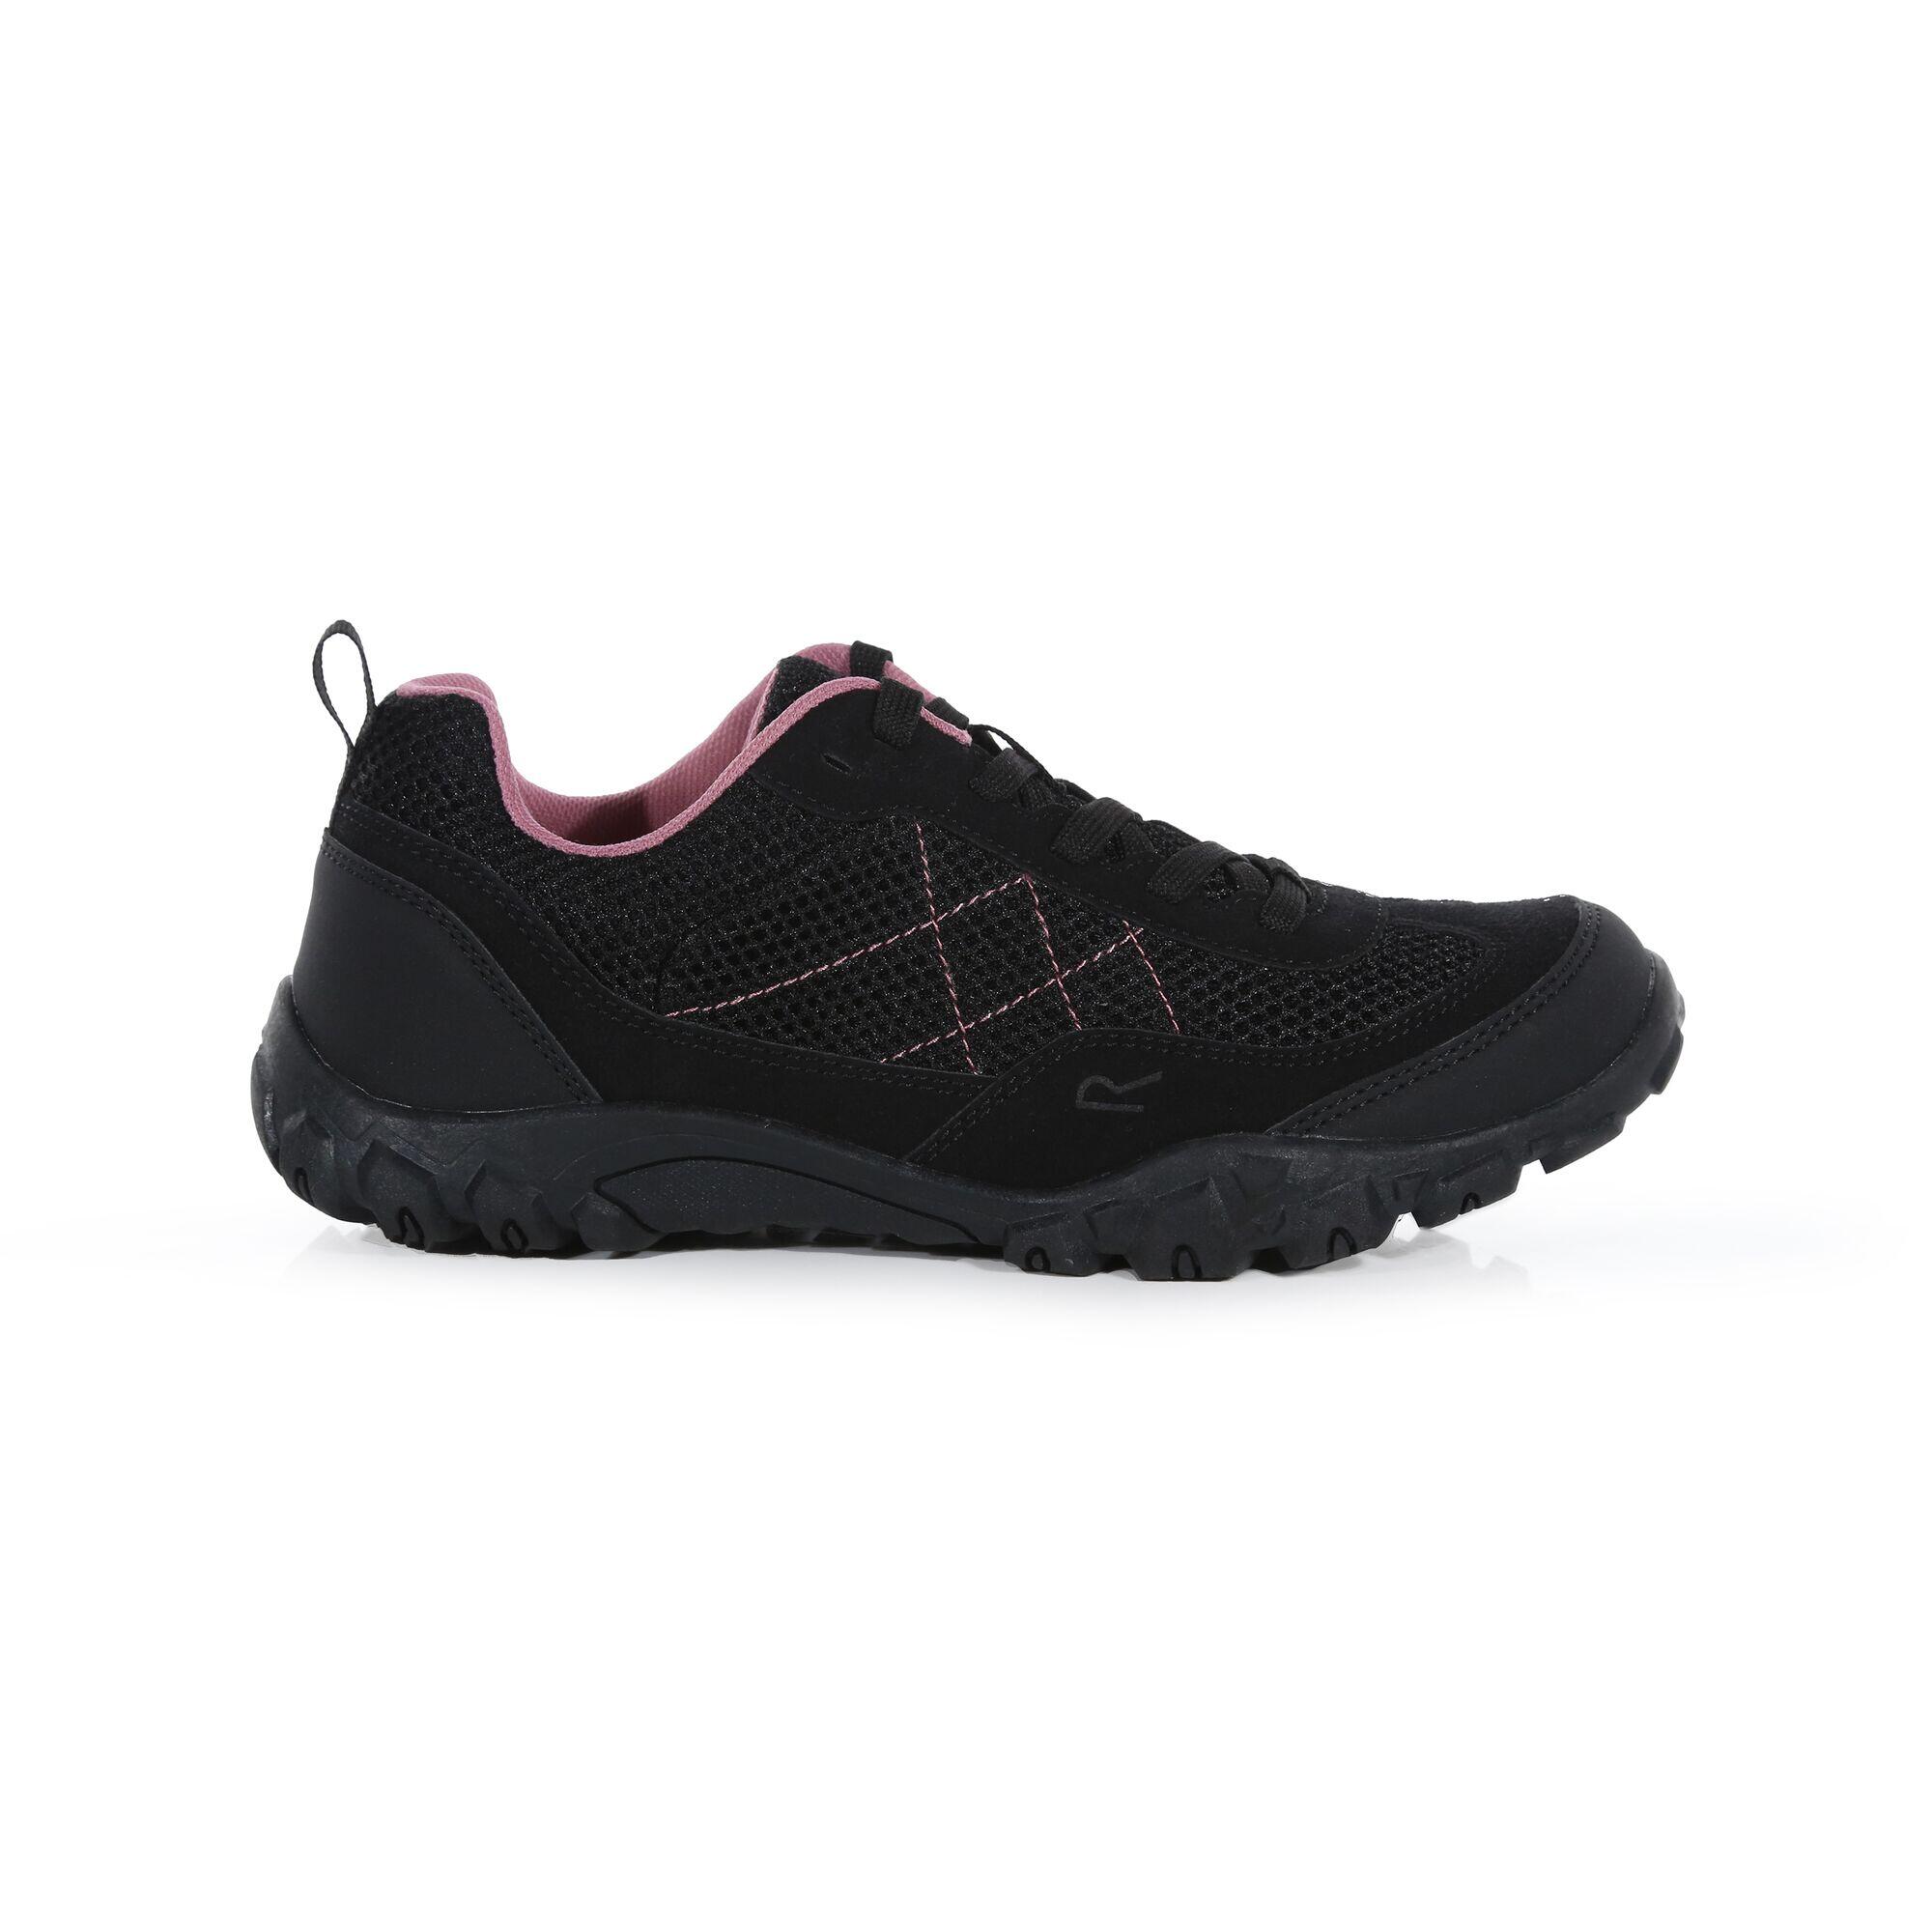 Lady Edgepoint Life Women's Walking Trainers - Black / Pink 1/6